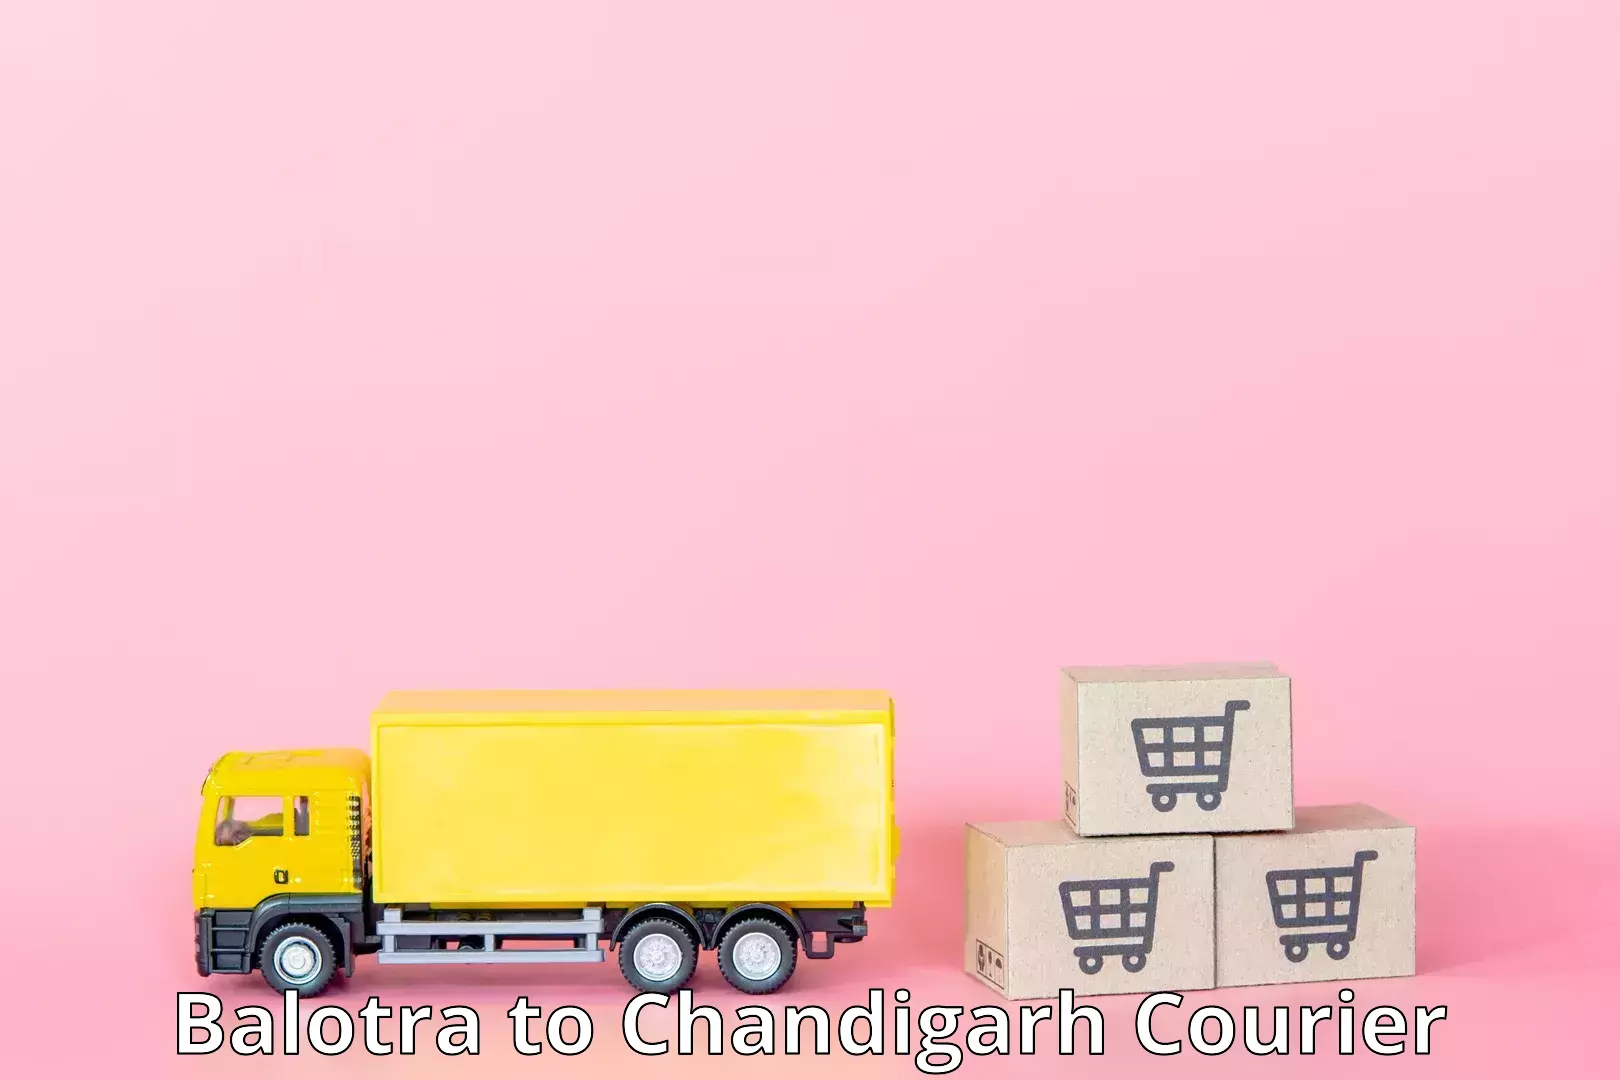 Package delivery network Balotra to Chandigarh